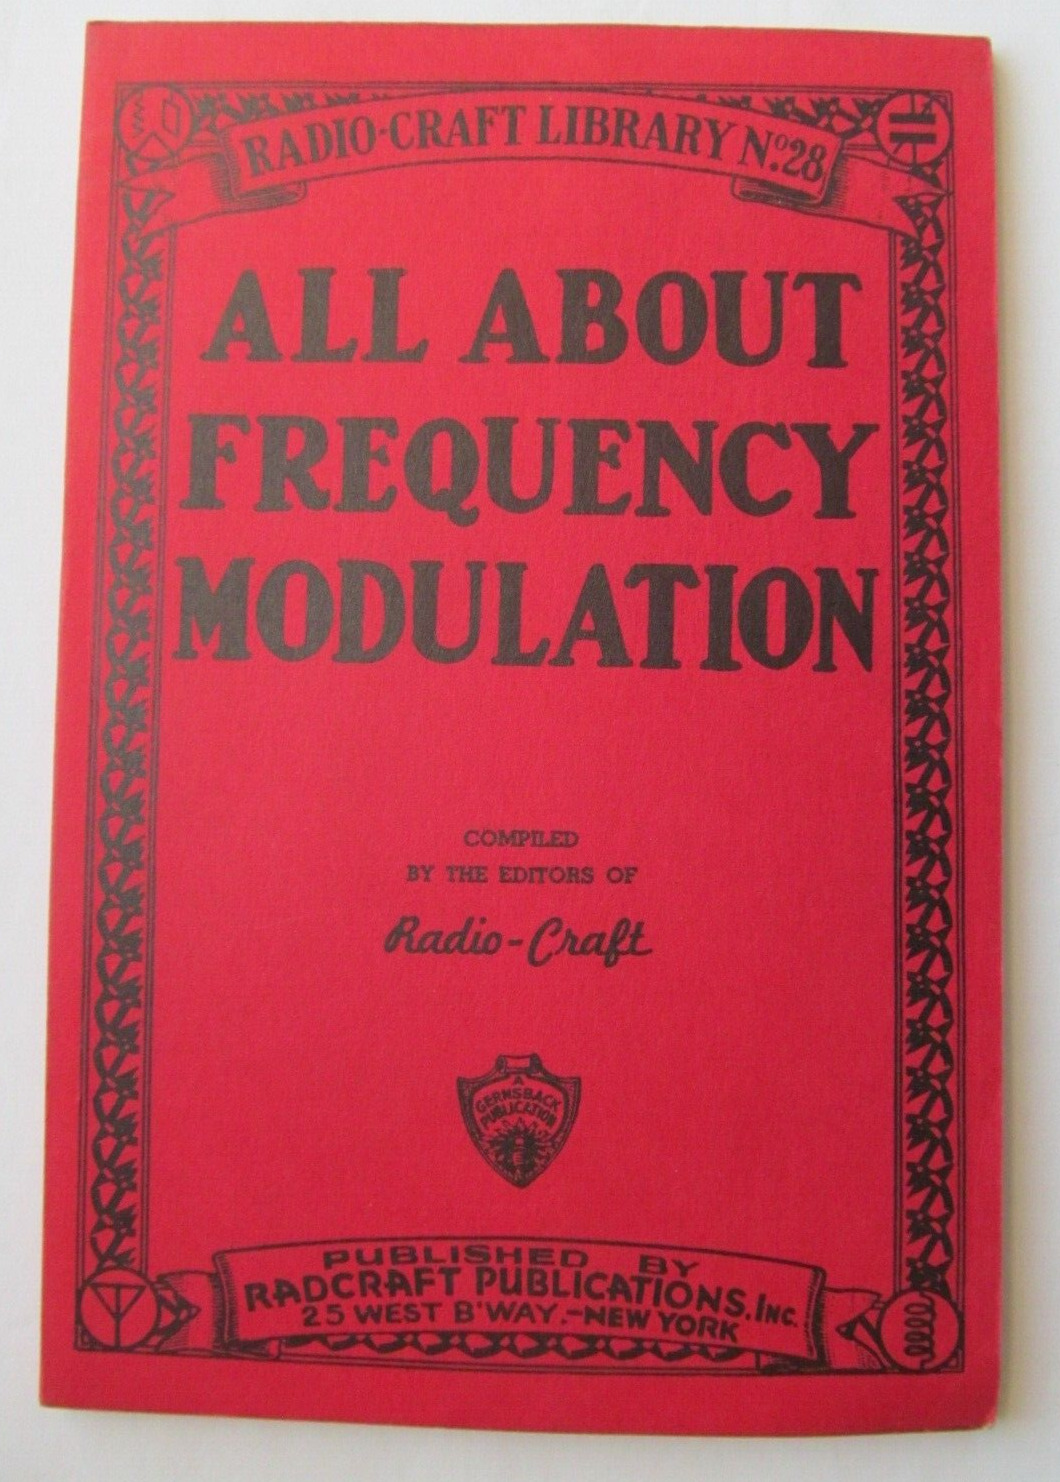 All About Frequency Modulation - Radio Craft Library 1941 Softcover